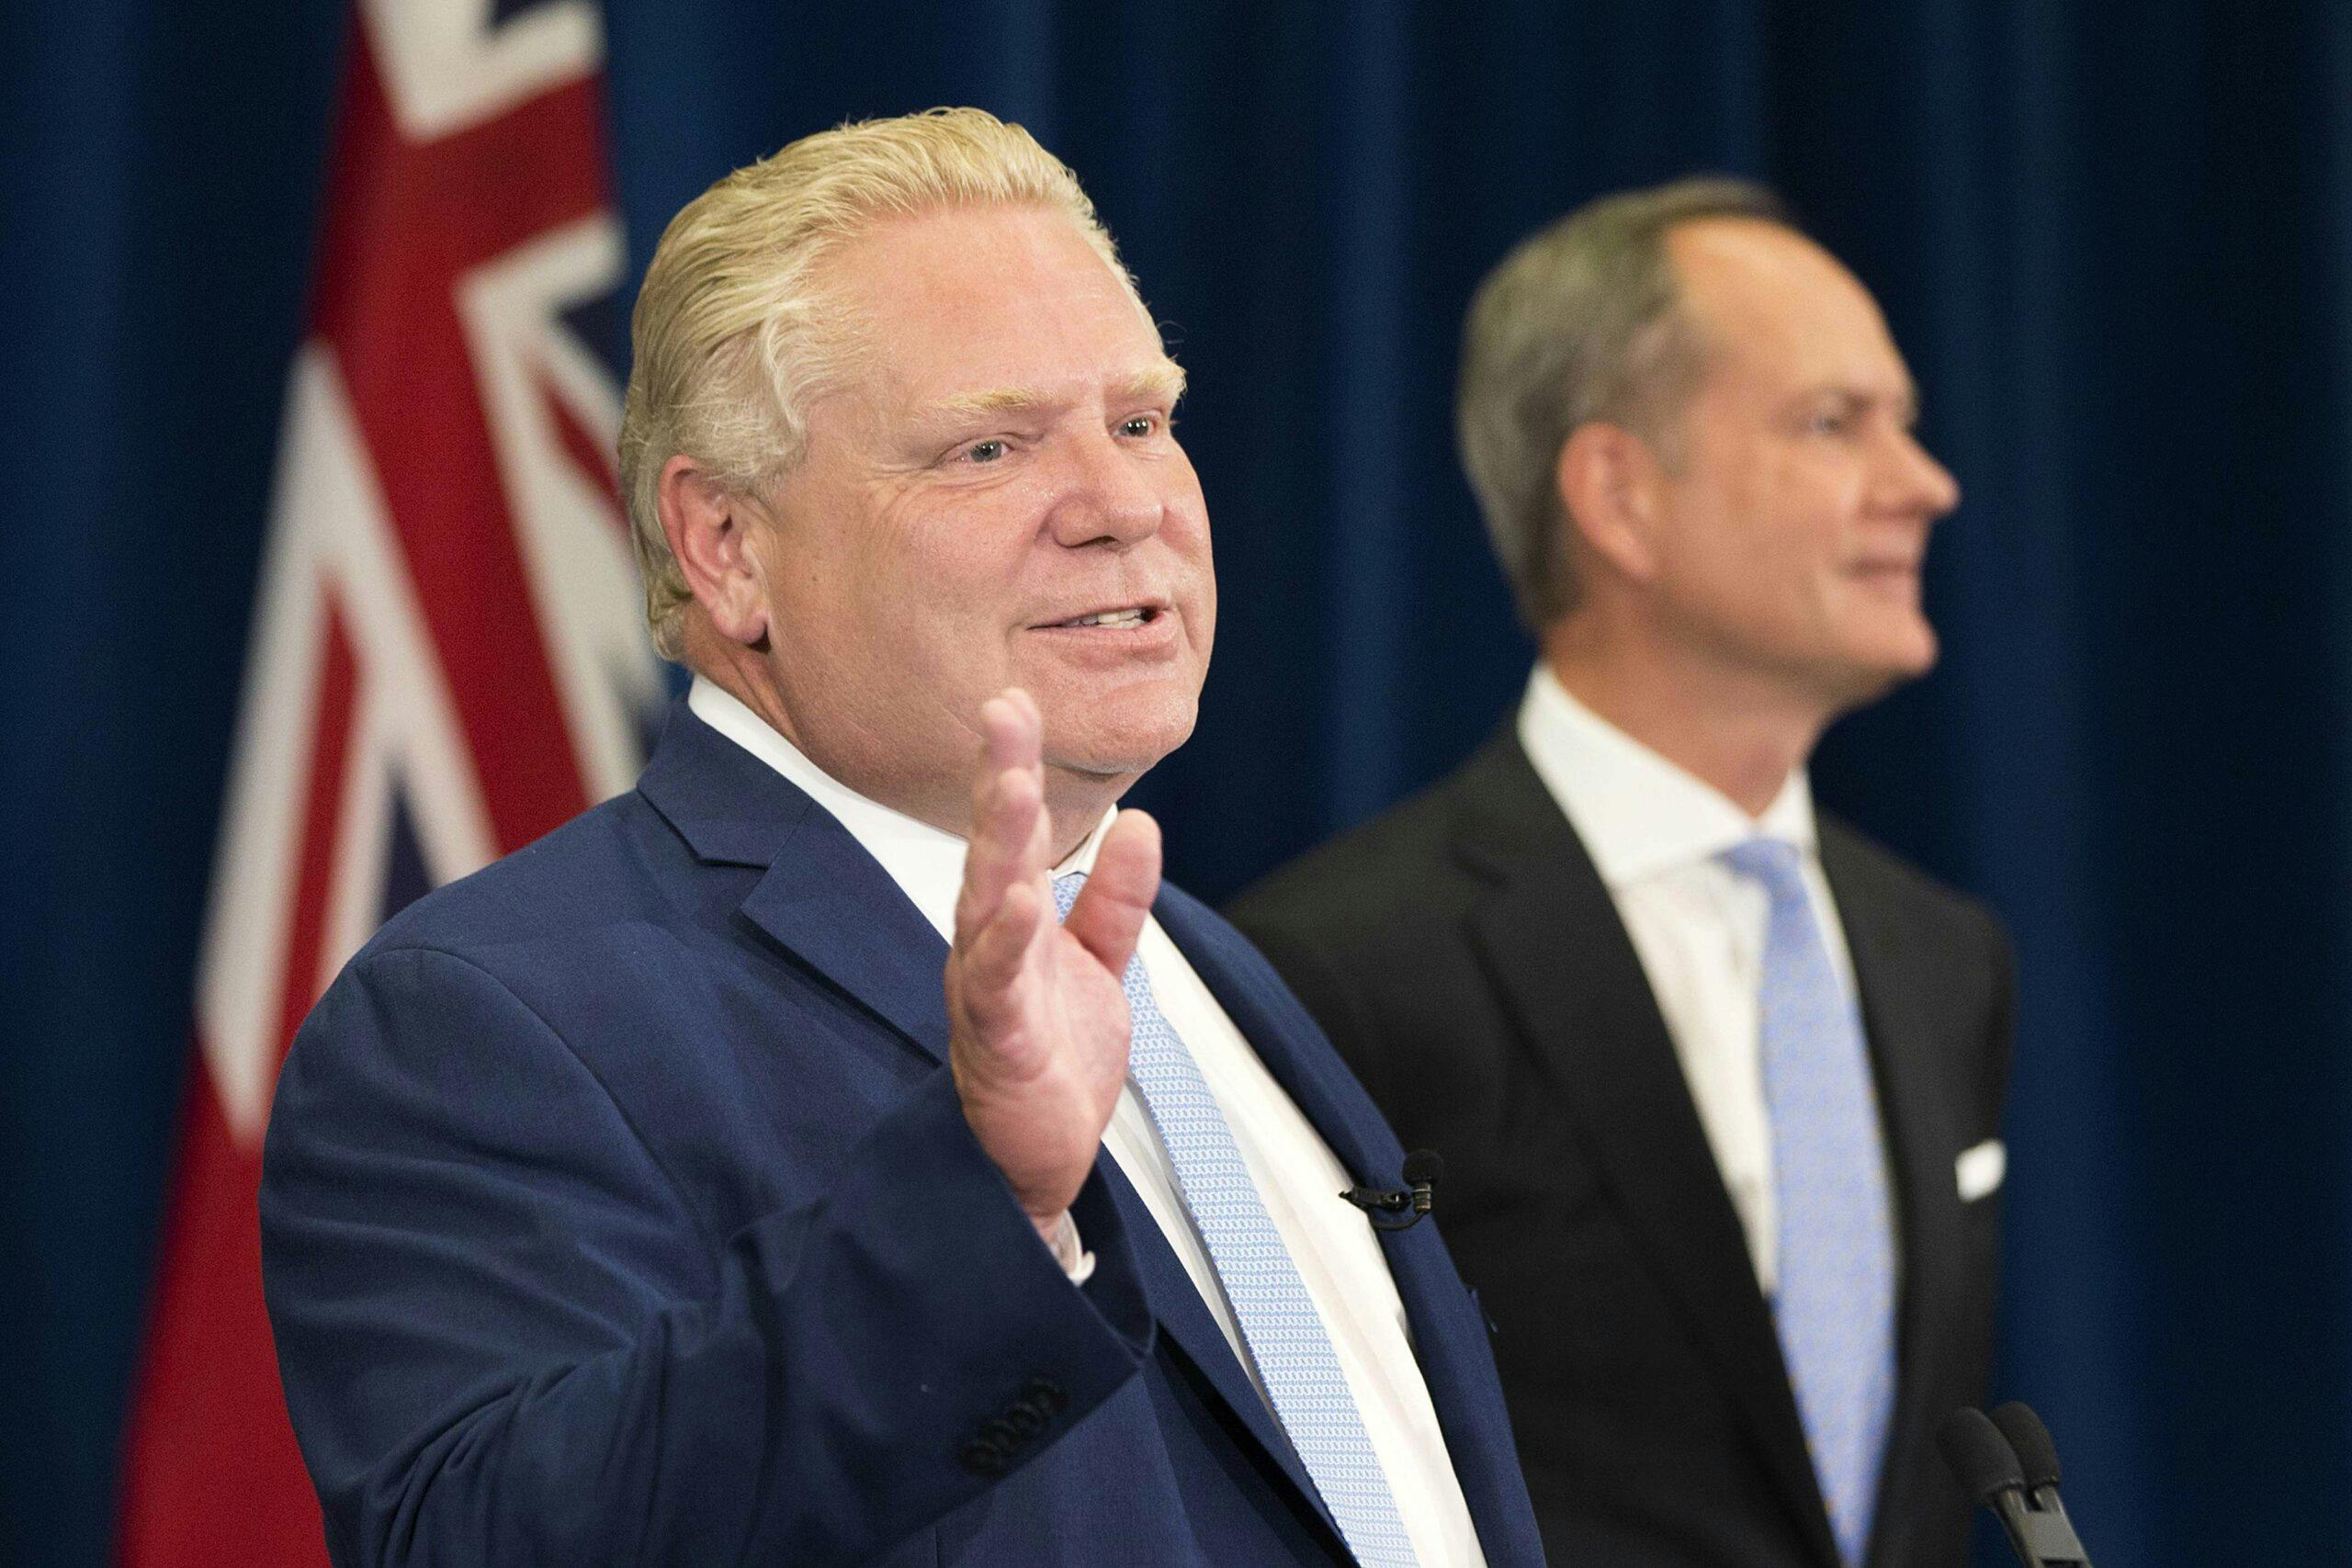 Ontario businesses can use federal vaccine passport: premier’s office